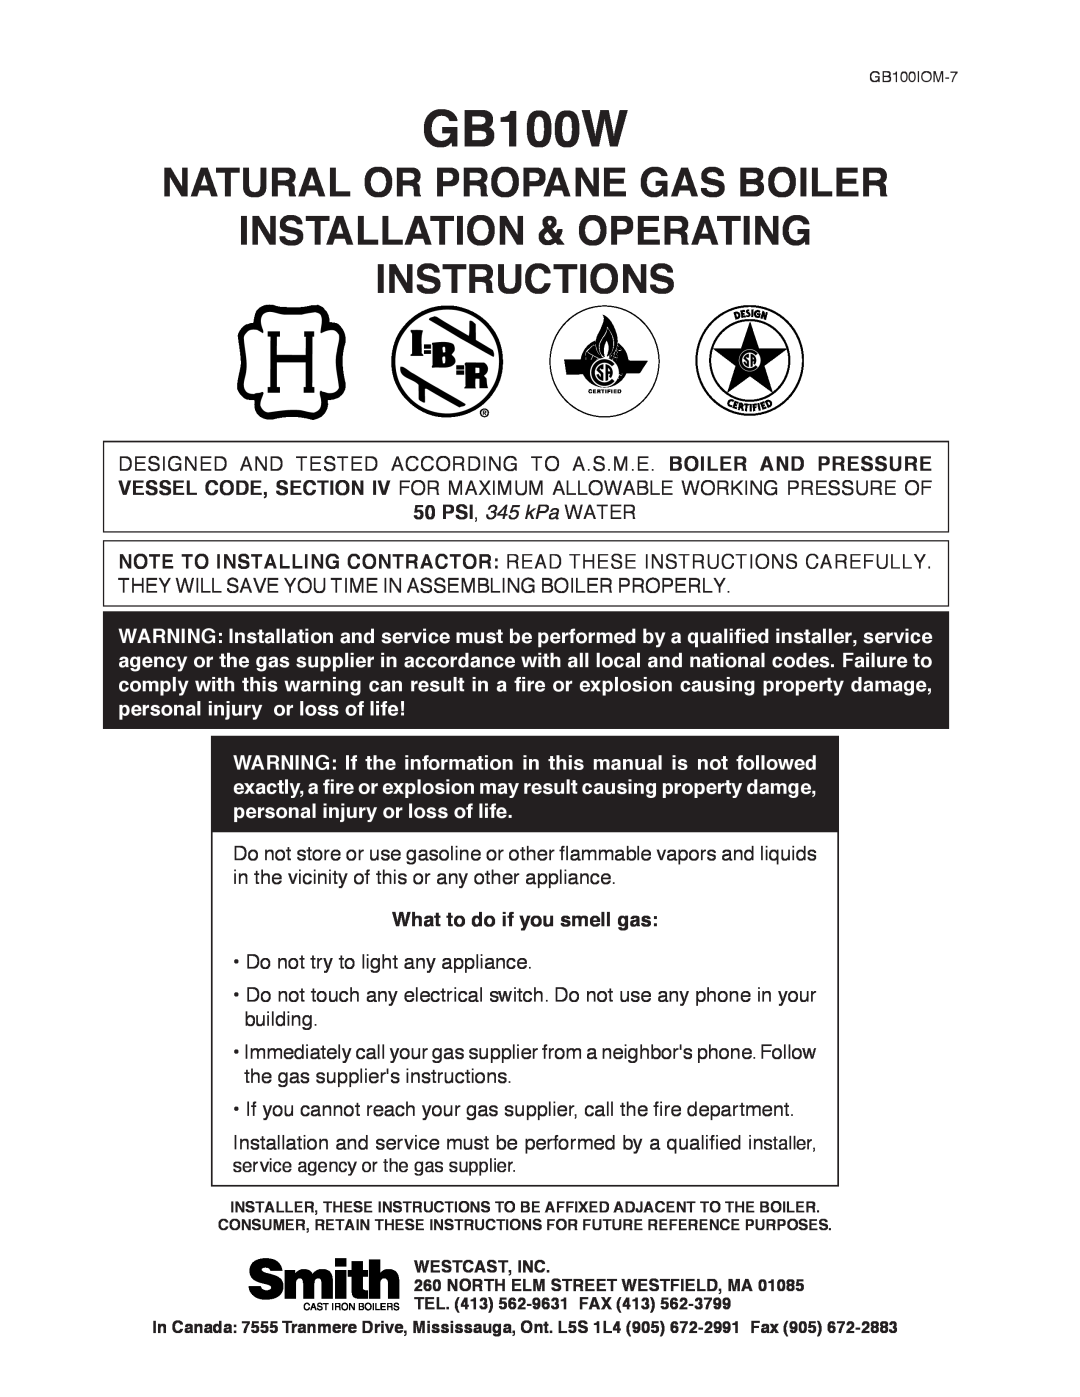 Smith Cast Iron Boilers GB100W manual Natural Or Propane Gas Boiler, Installation & Operating Instructions 